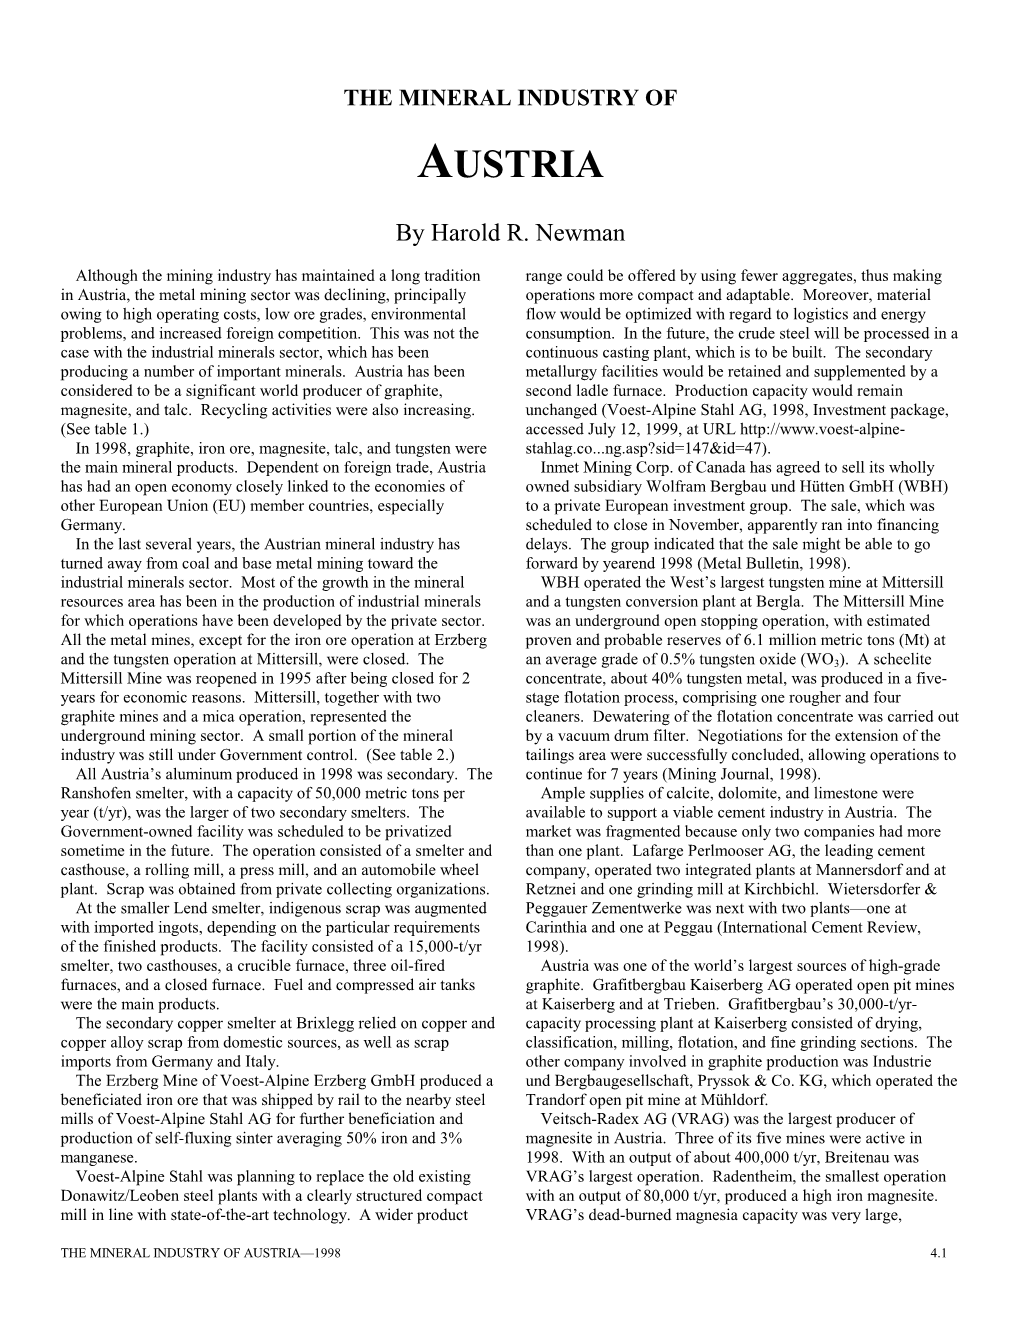 The Mineral Industry of Austria in 1998